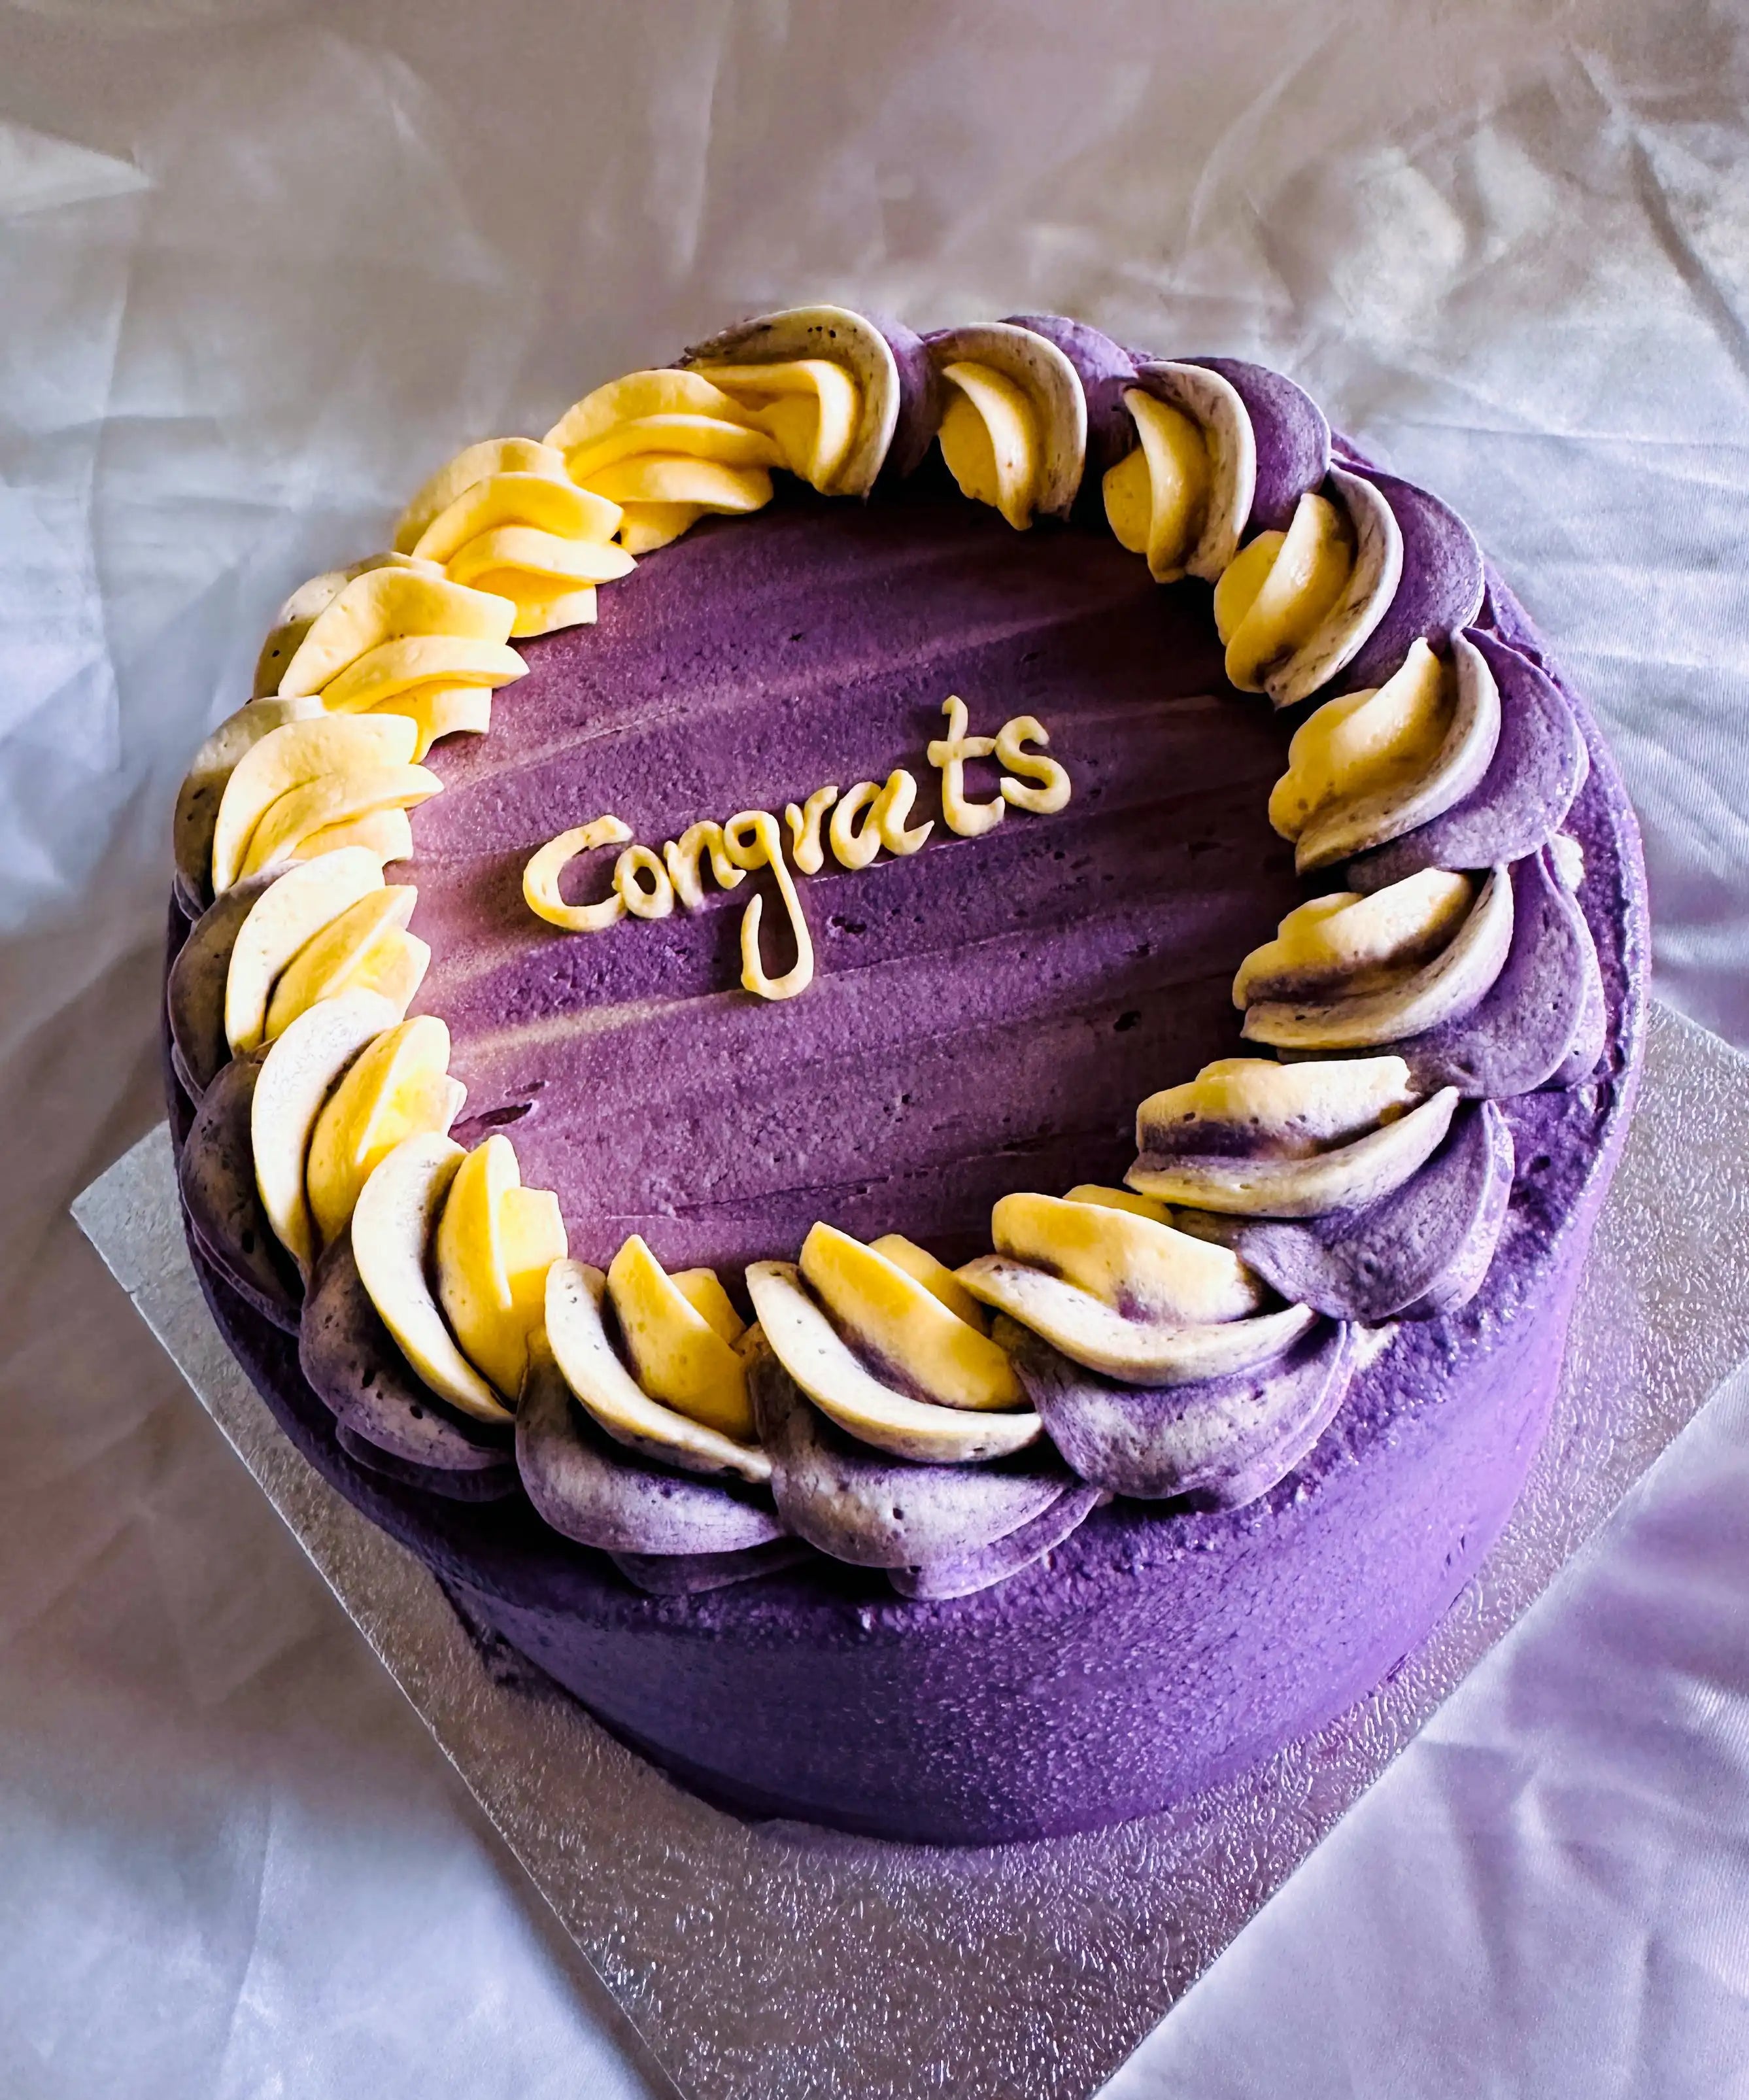 Exceptional cakes for unique occasions, baked with love